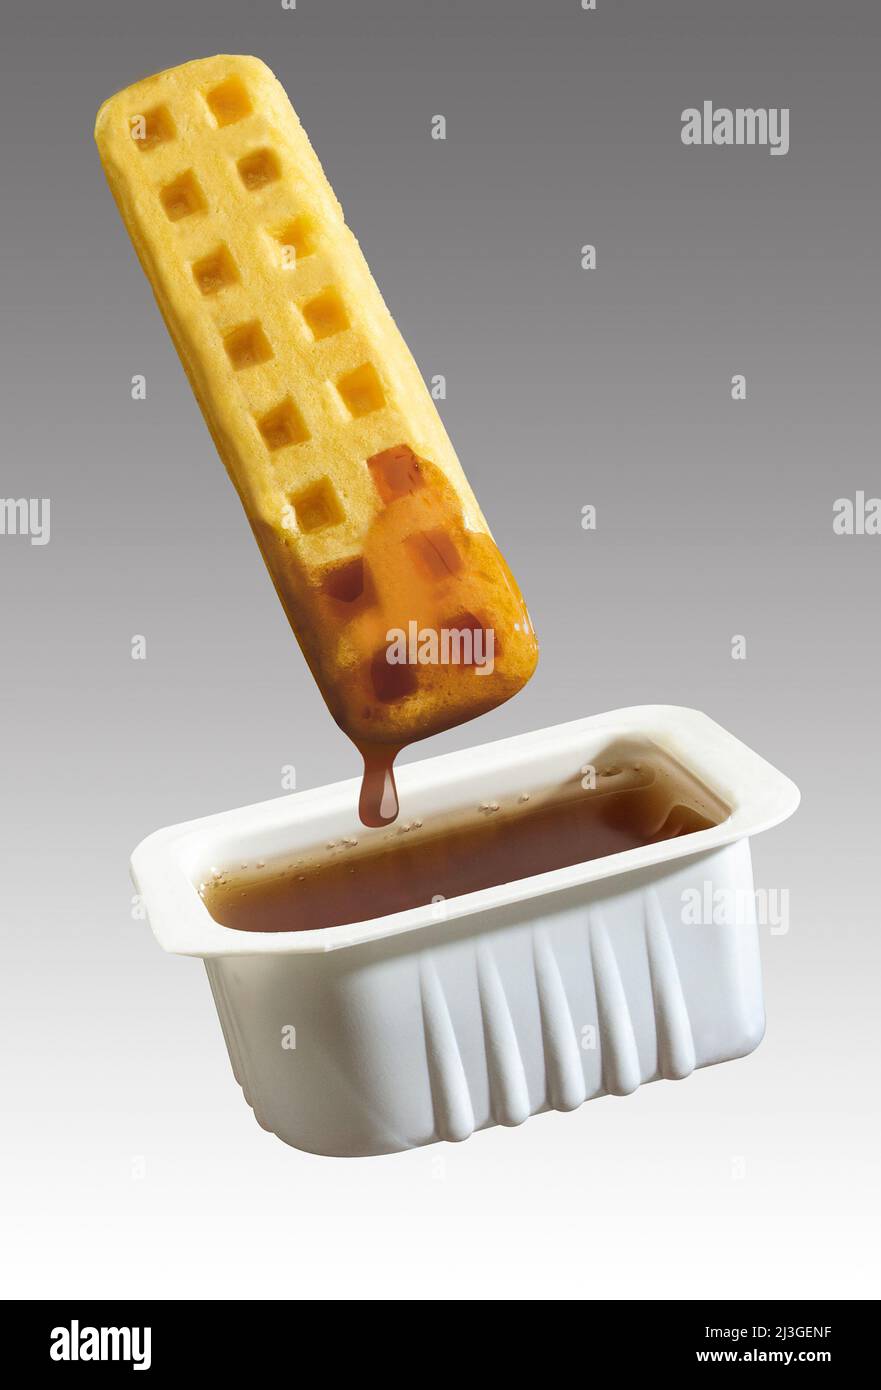 waffle stick dipped in syrup Stock Photo